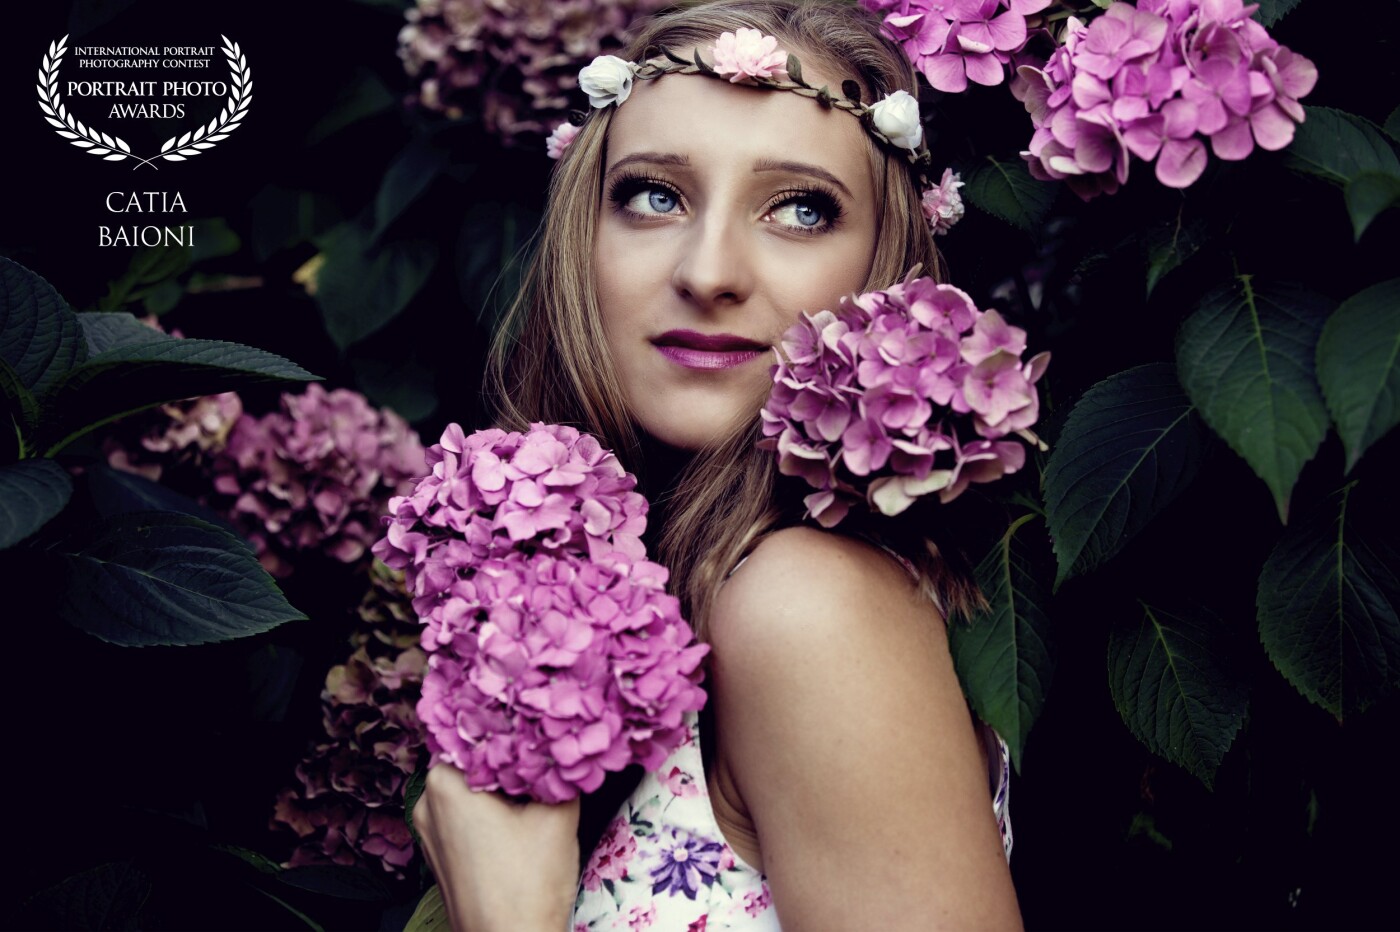 This photo was taken spontaneously on a summer evening in the city of Bern. It was a hedge with lots of pink flowers immediately my model sat in the hedge and we did this dreamy photo.<br />
Fotograf: http://baionifotografie.com/<br />
Model: https://www.facebook.com/PhotomodelChiara<br />
